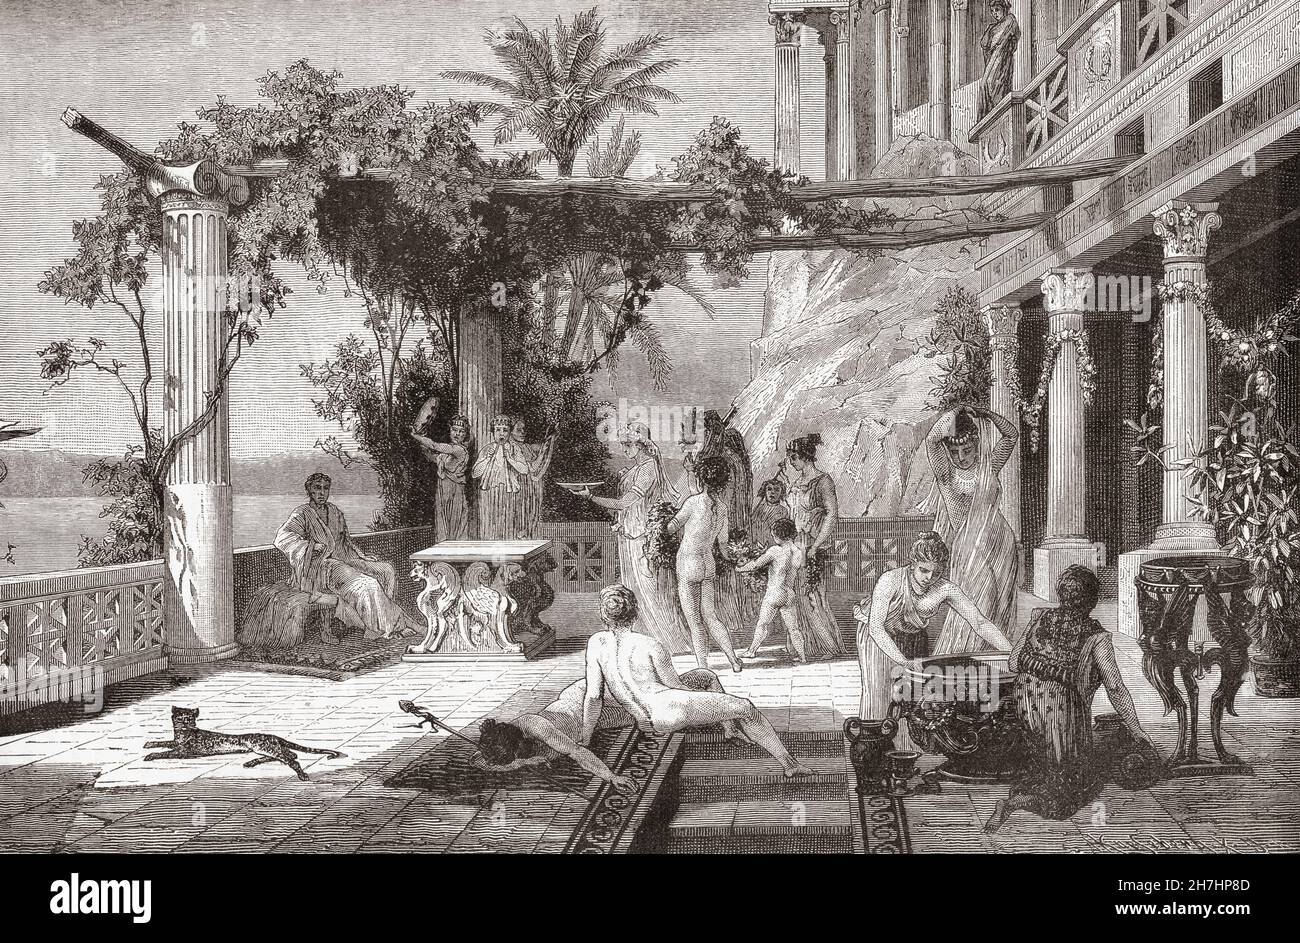 Tiberius at his villa on the island of Capri, he spent many of his final years there.  Tiberius Caesar Augustus,  42 BC – AD 37.  Second Roman emperor.  From Cassell's Illustrated Universal History, published 1883. Stock Photo